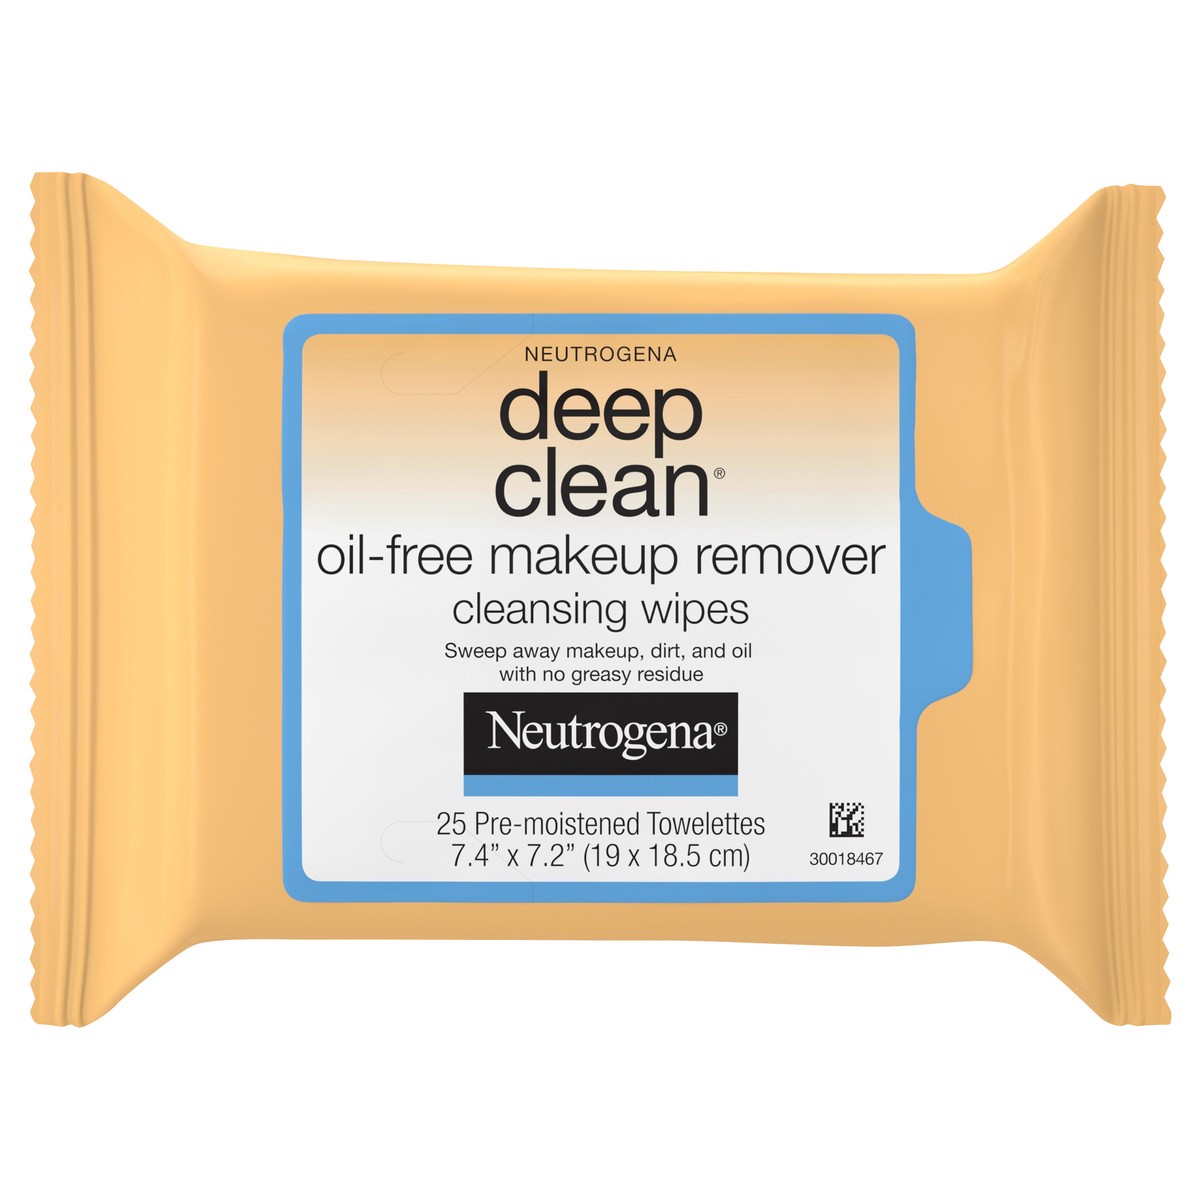 slide 1 of 9, Neutrogena Deep Clean Oil-Free Makeup Remover Cleansing Face Wipes, Daily Cleansing Towelettes to Remove Dirt, Oil, and Makeup, 25 ct, 25 ct